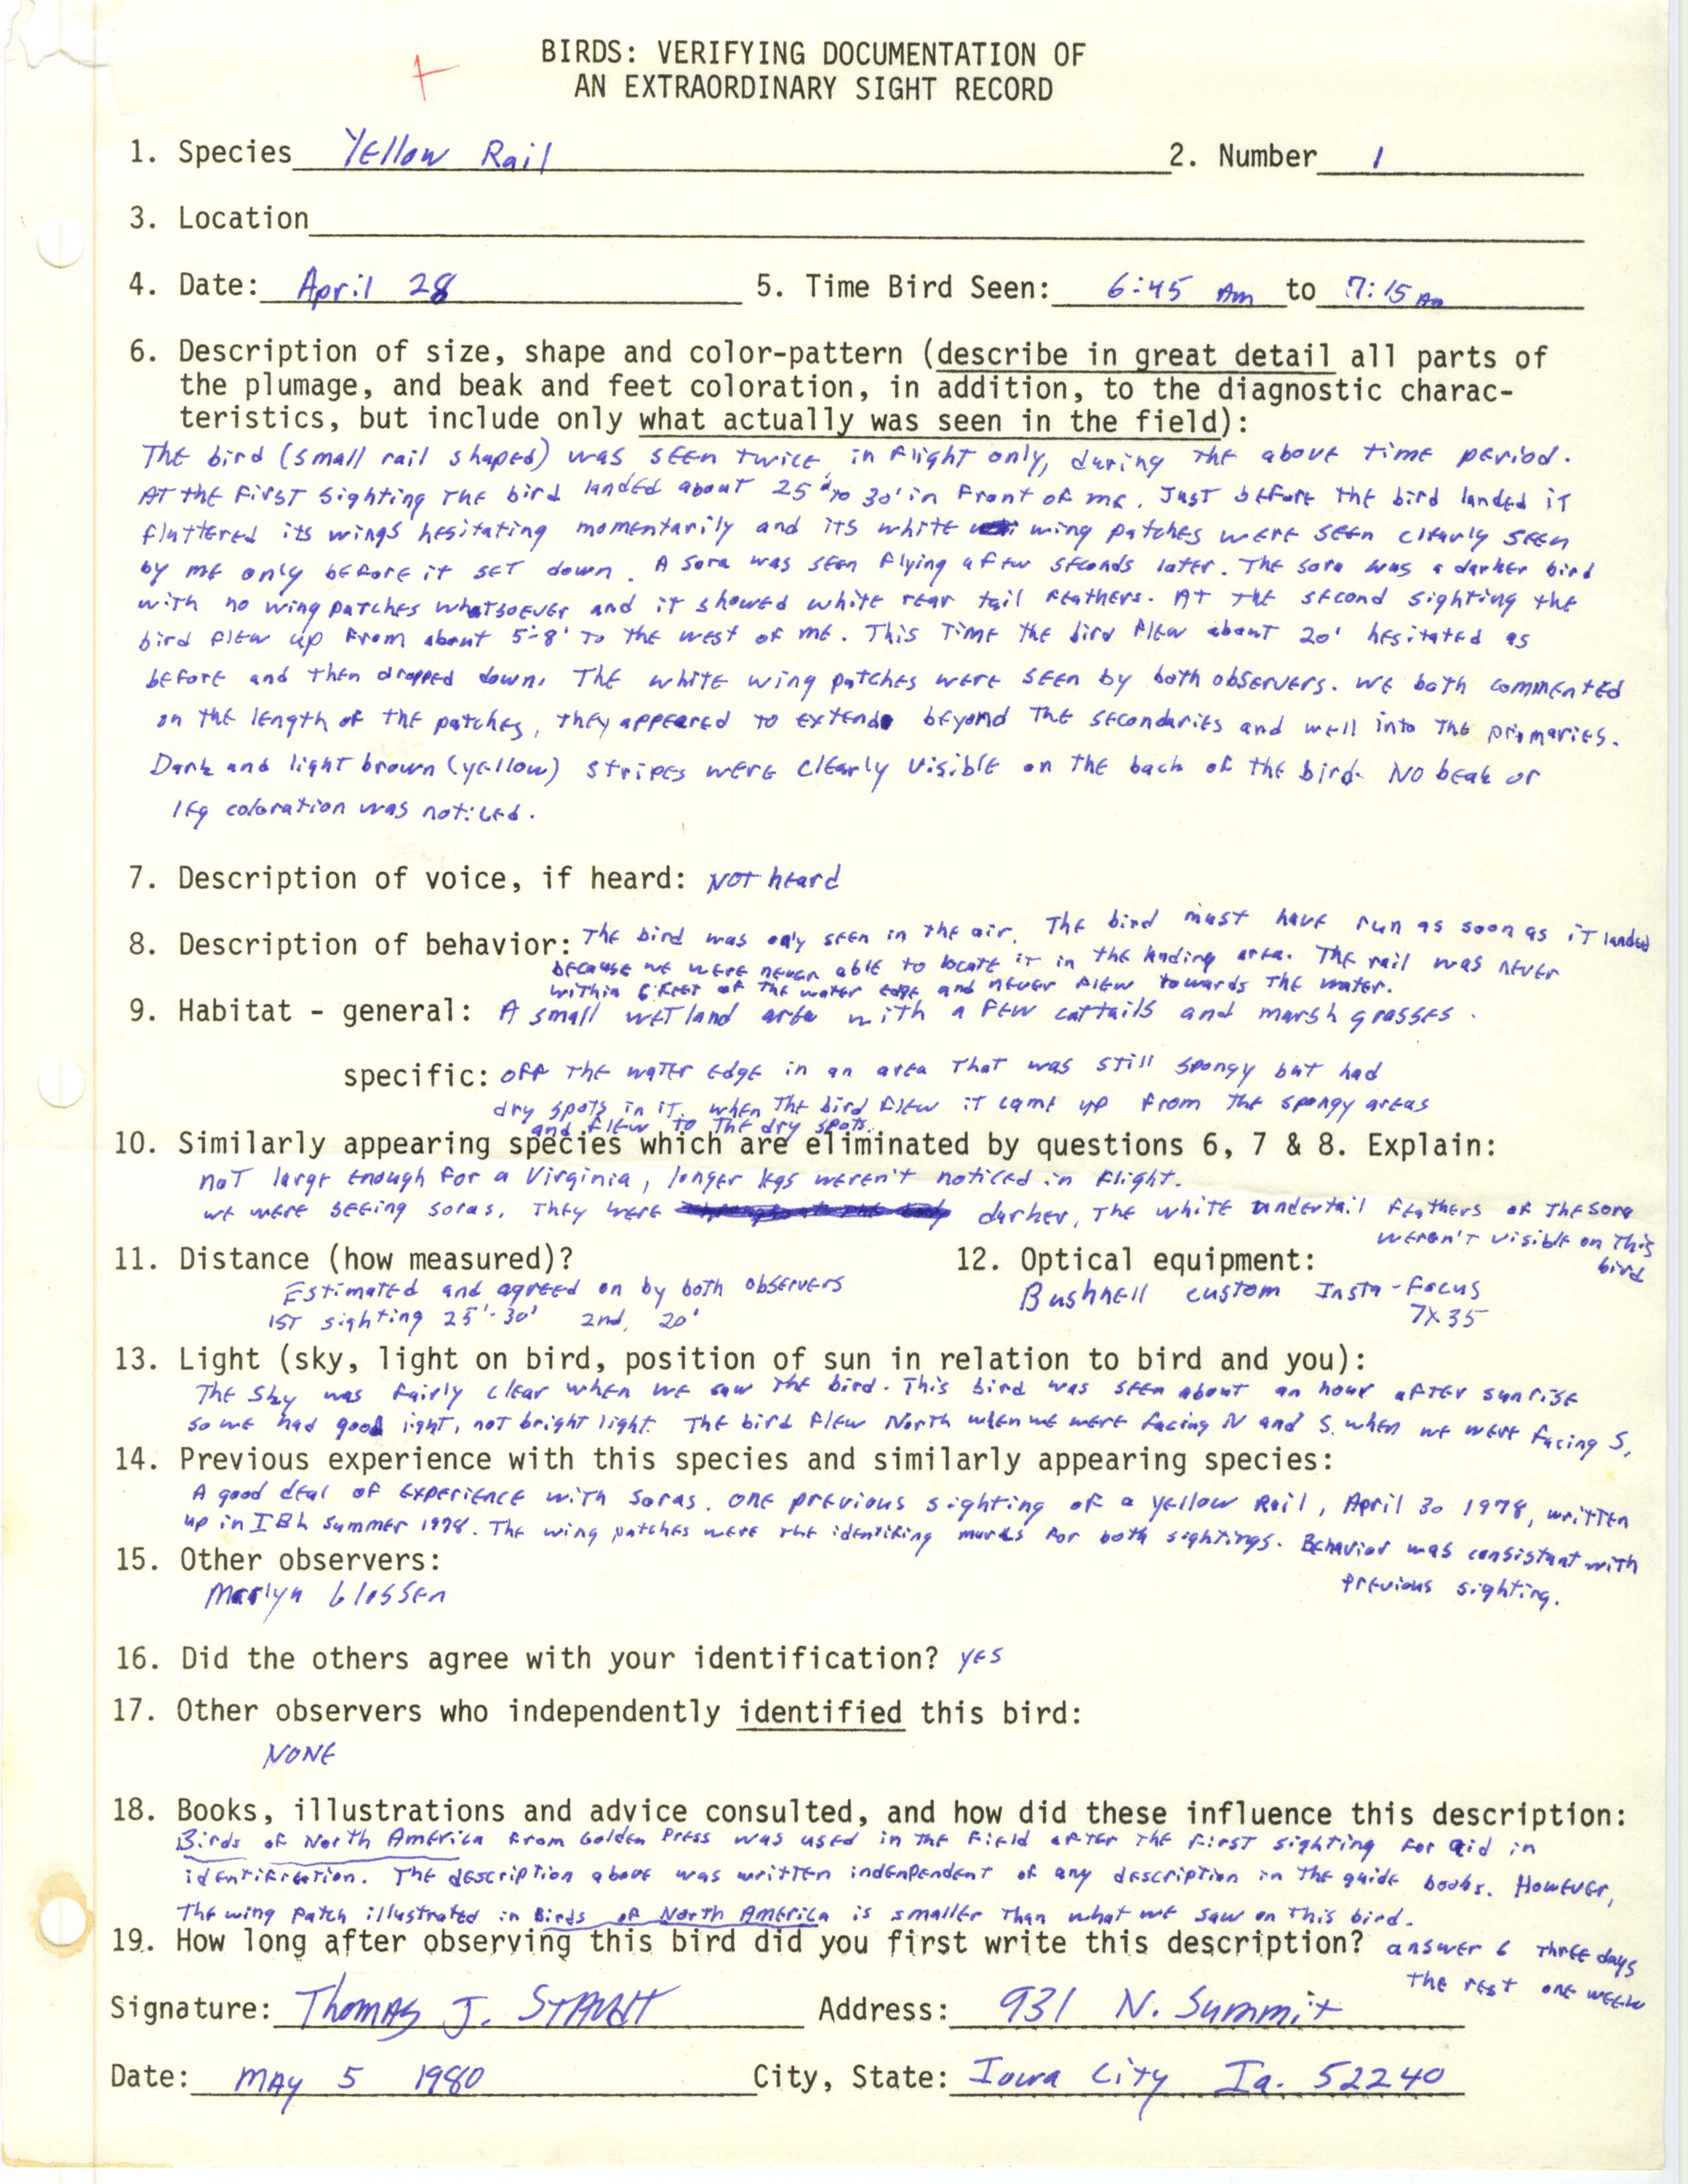 Rare bird documentation form for Yellow Rail at Swan Lake in 1980